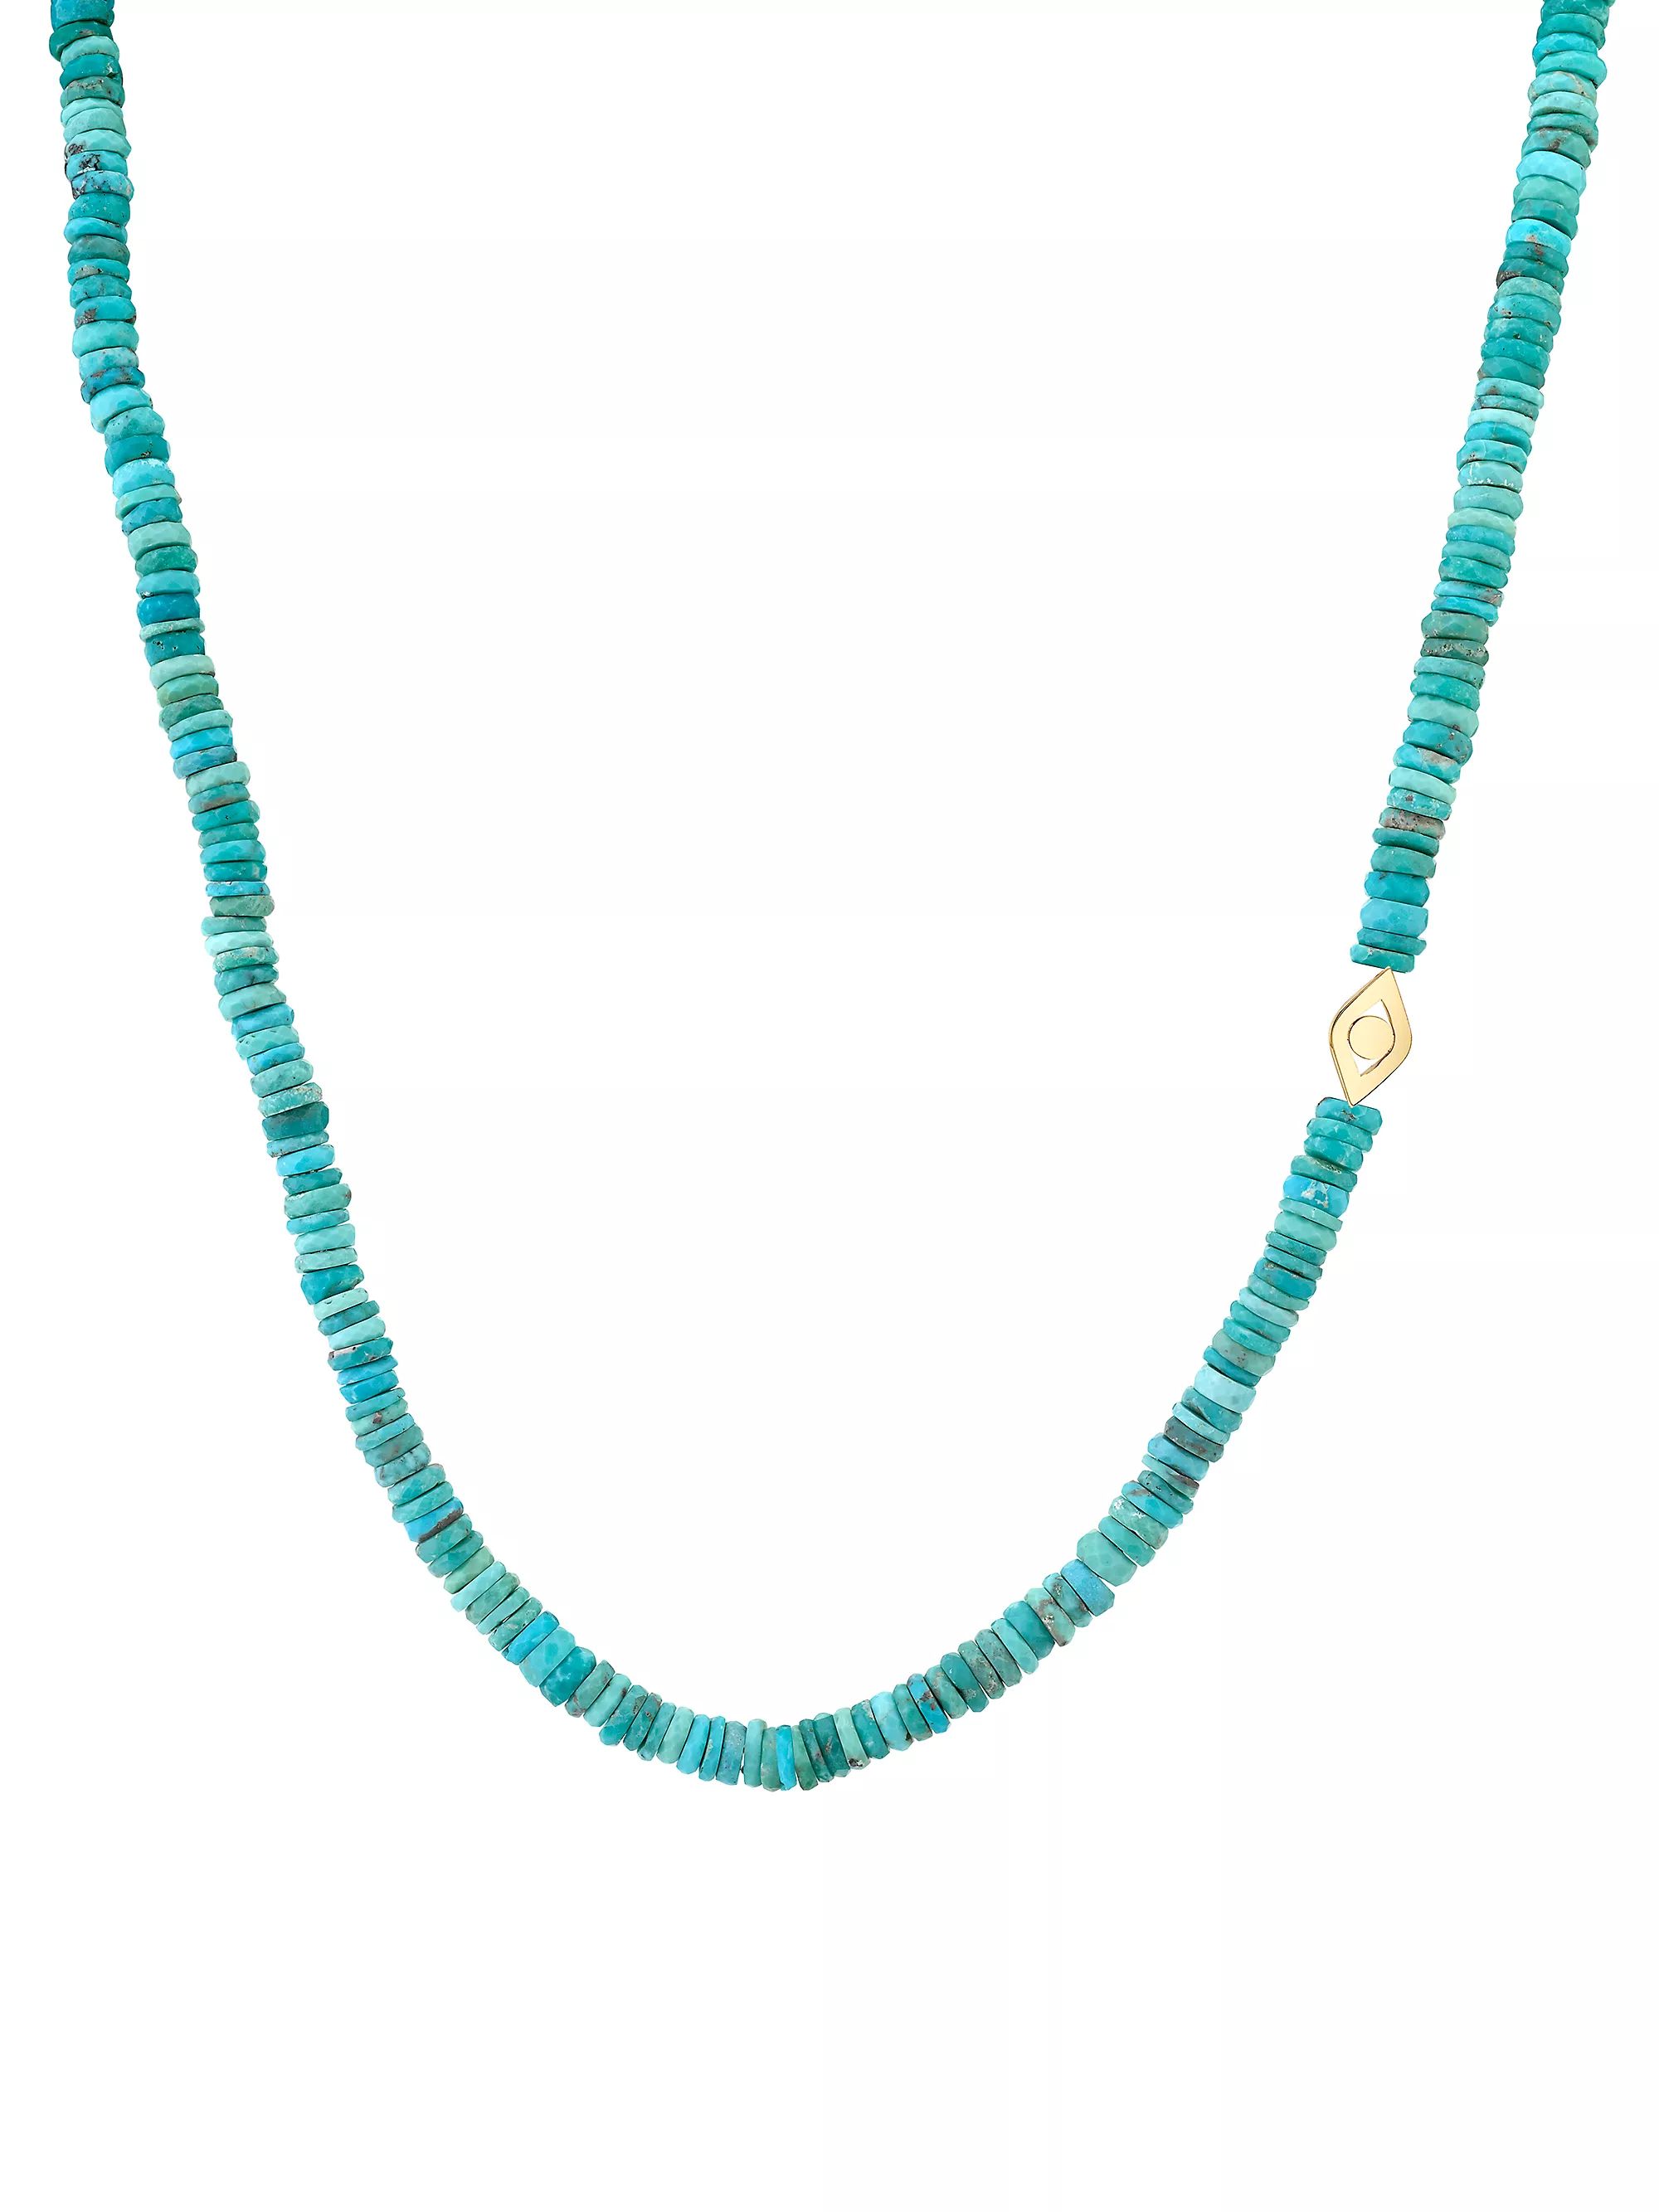 14K Yellow Gold & Turquoise Bead Evil Eye Charm Necklace | Saks Fifth Avenue